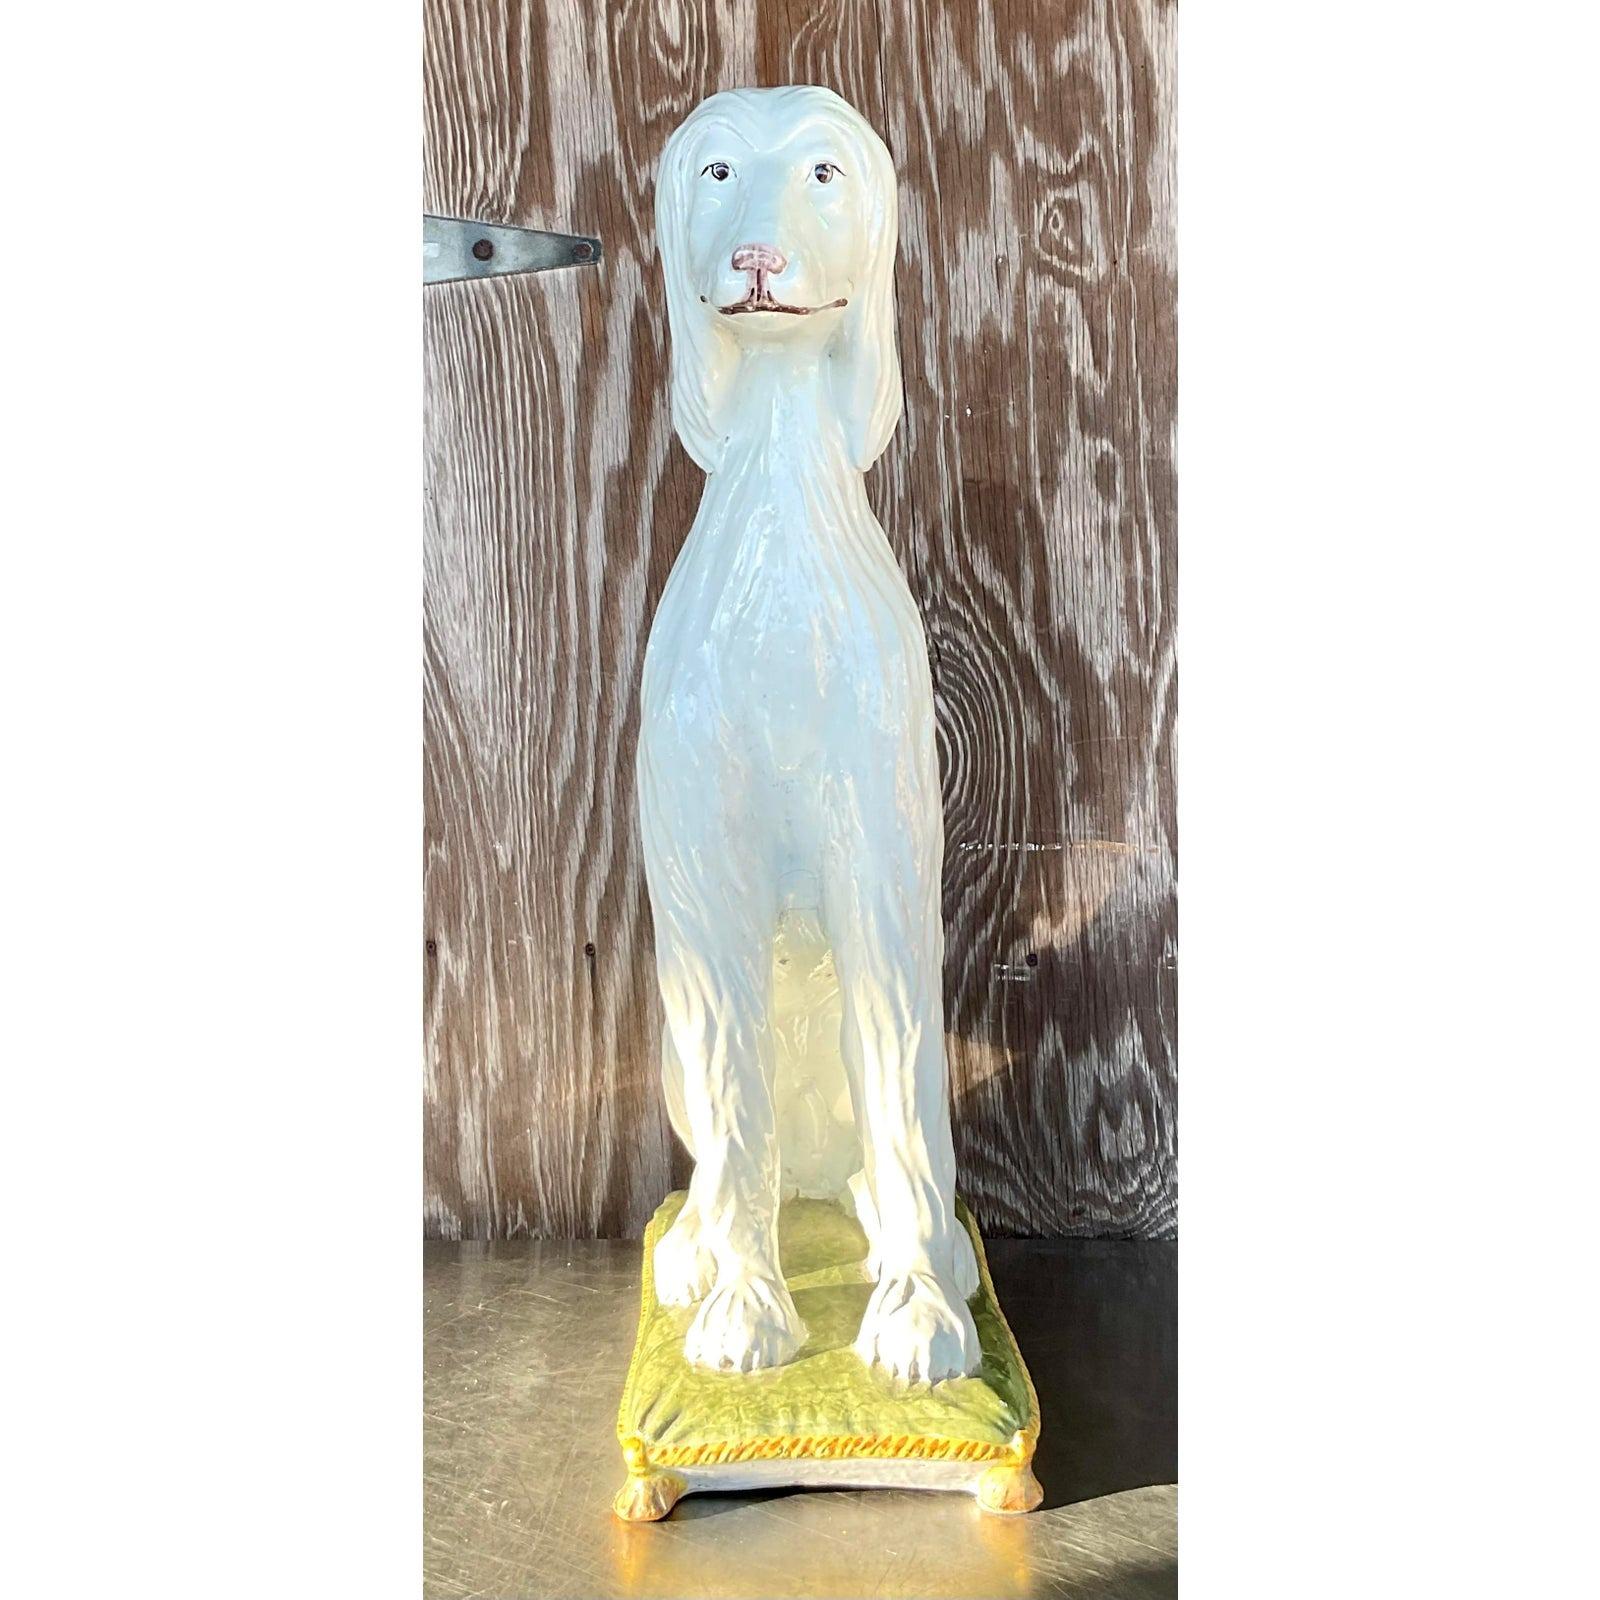 A fabulous vintage MCM life size dog. A chic glazed ceramic Afghan dog with a glazed ceramic finish. Made in Italy. Acquired from a Palm Beach estate